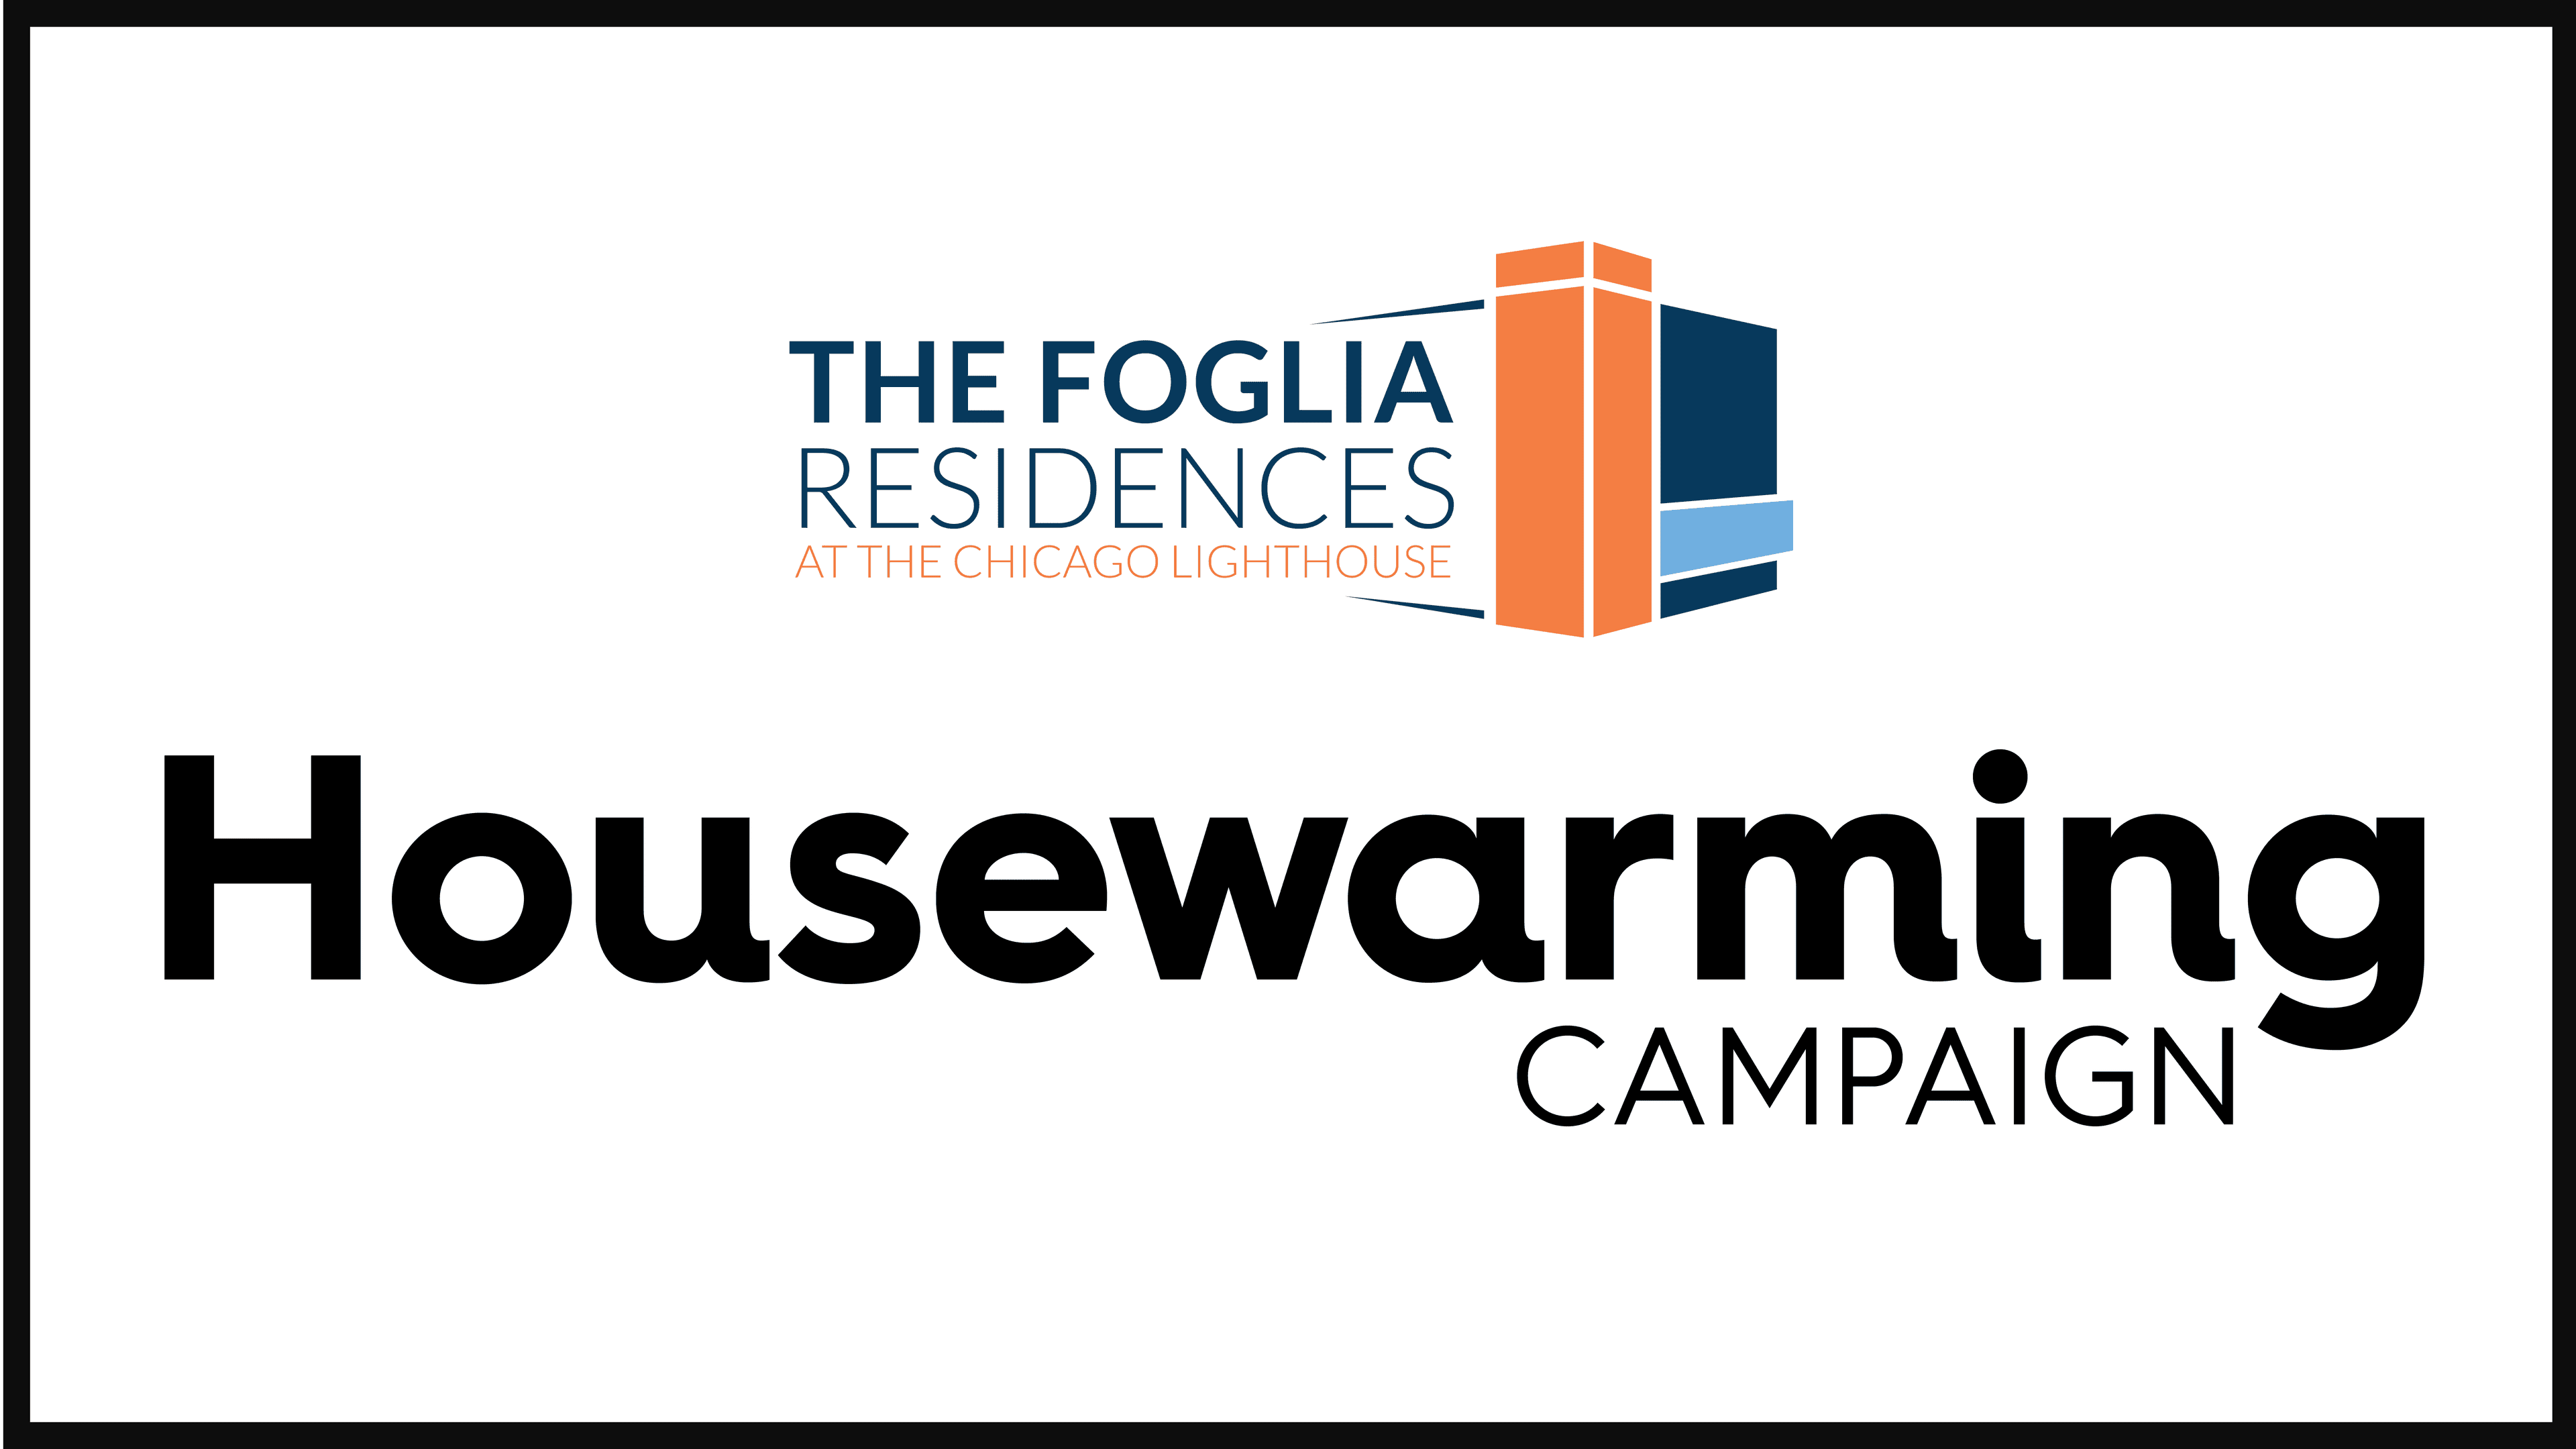 The Foglia Residences at the Chicago Lighthouse logo and text "Housewarming Campaign"